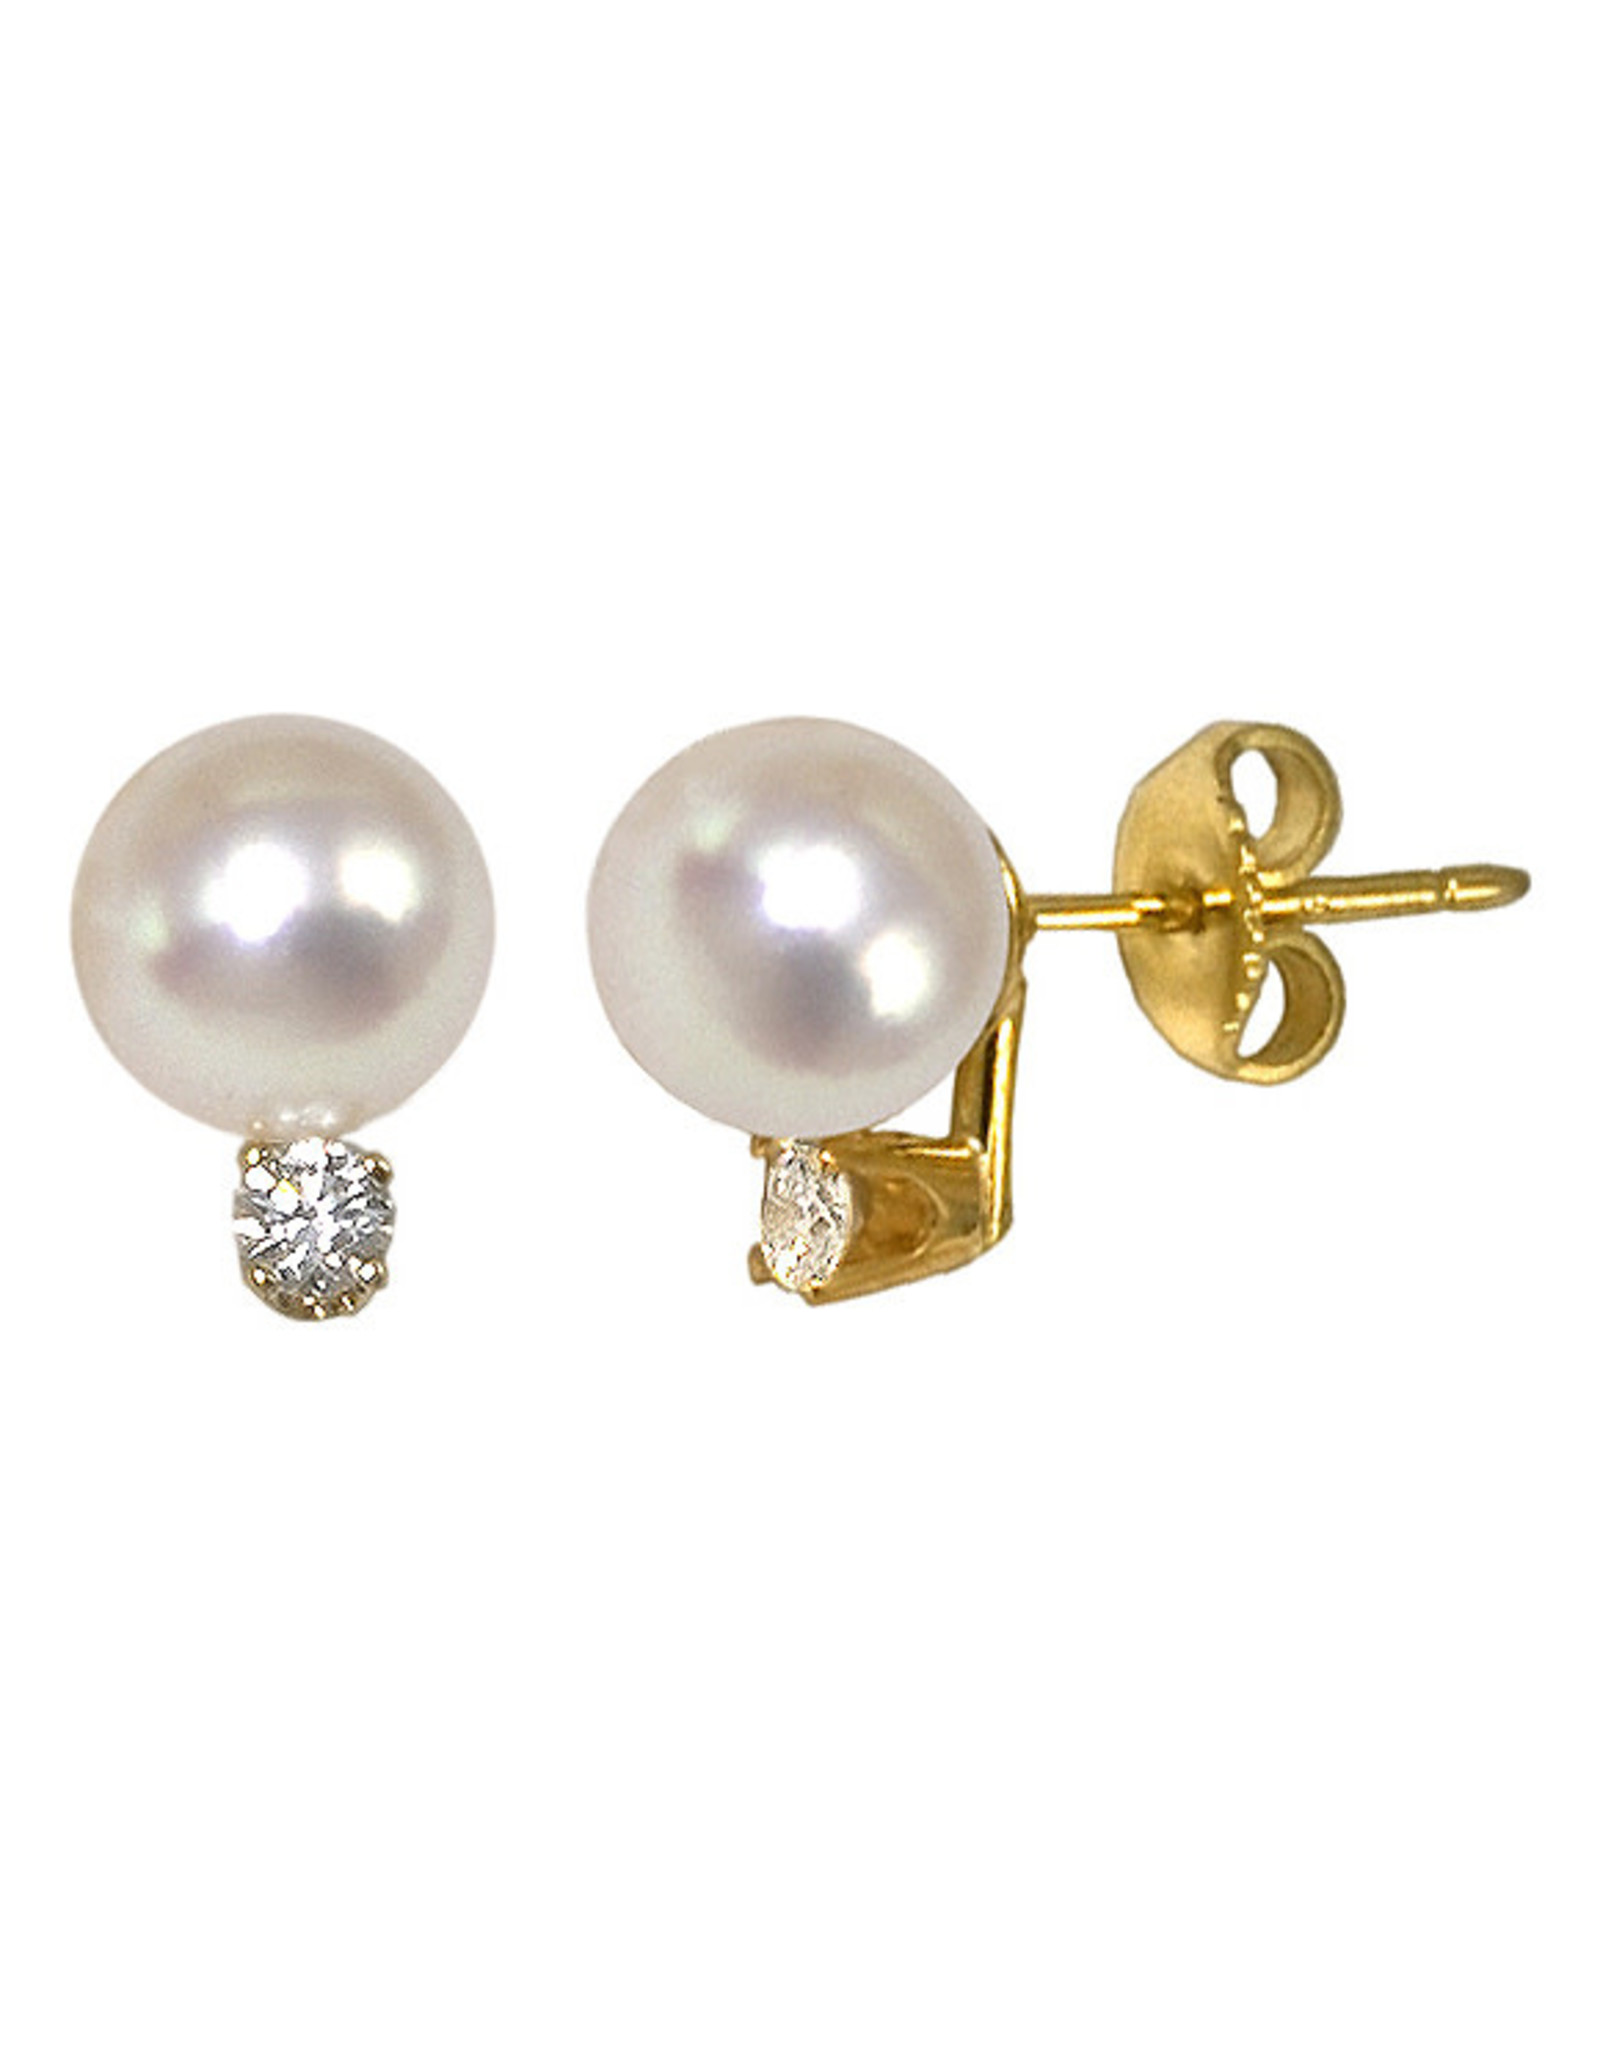 14K Yellow Gold 8.5mm Pearl and Diamond Stud Earrings, D: 0.20ct